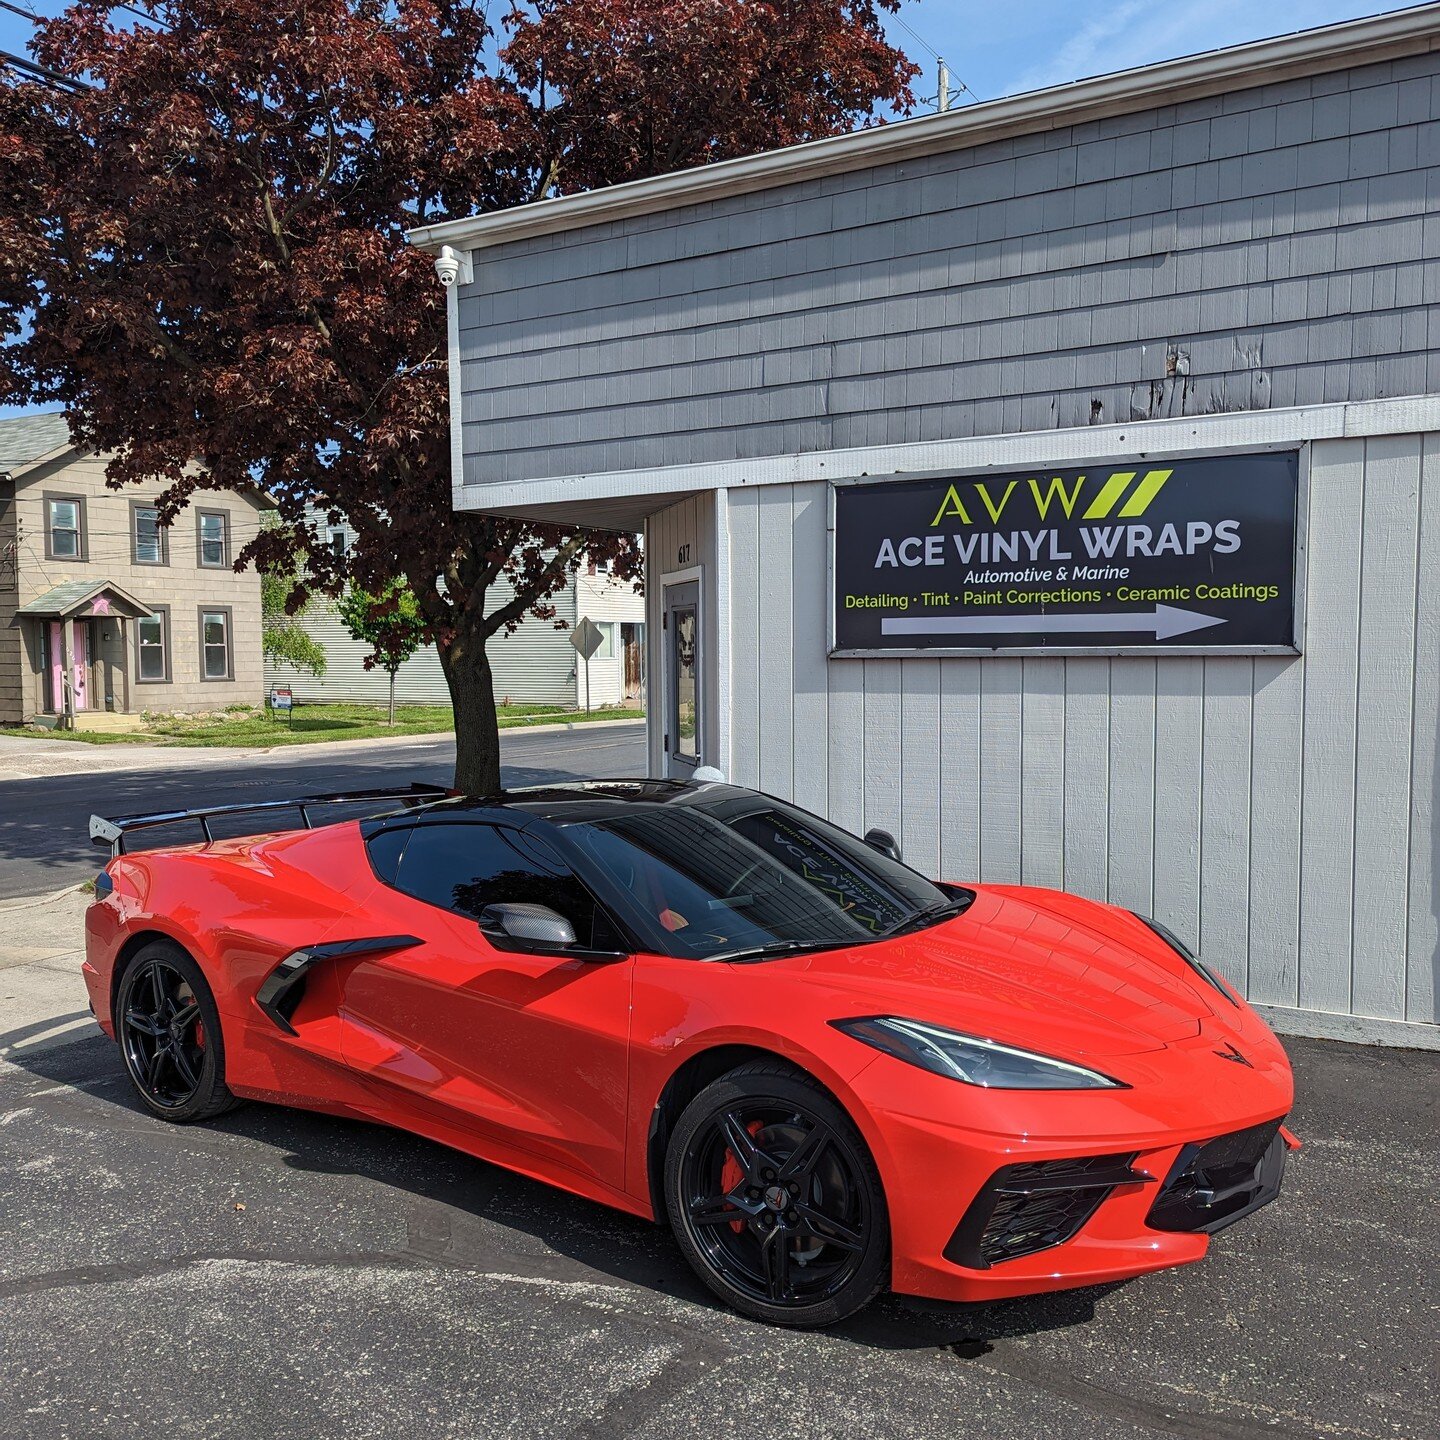 2021 C8 Corvette
Paint Enhancement, System X Pro 6 year Ceramic Coating on all painted surfaces, glass, wheels, calipers and vinyl

Hitek Carbon IR 5% sides and rear
Hitek Carbon IR 35% windshield

Gloss black roof wrap

Dark smoke gloss tail light t